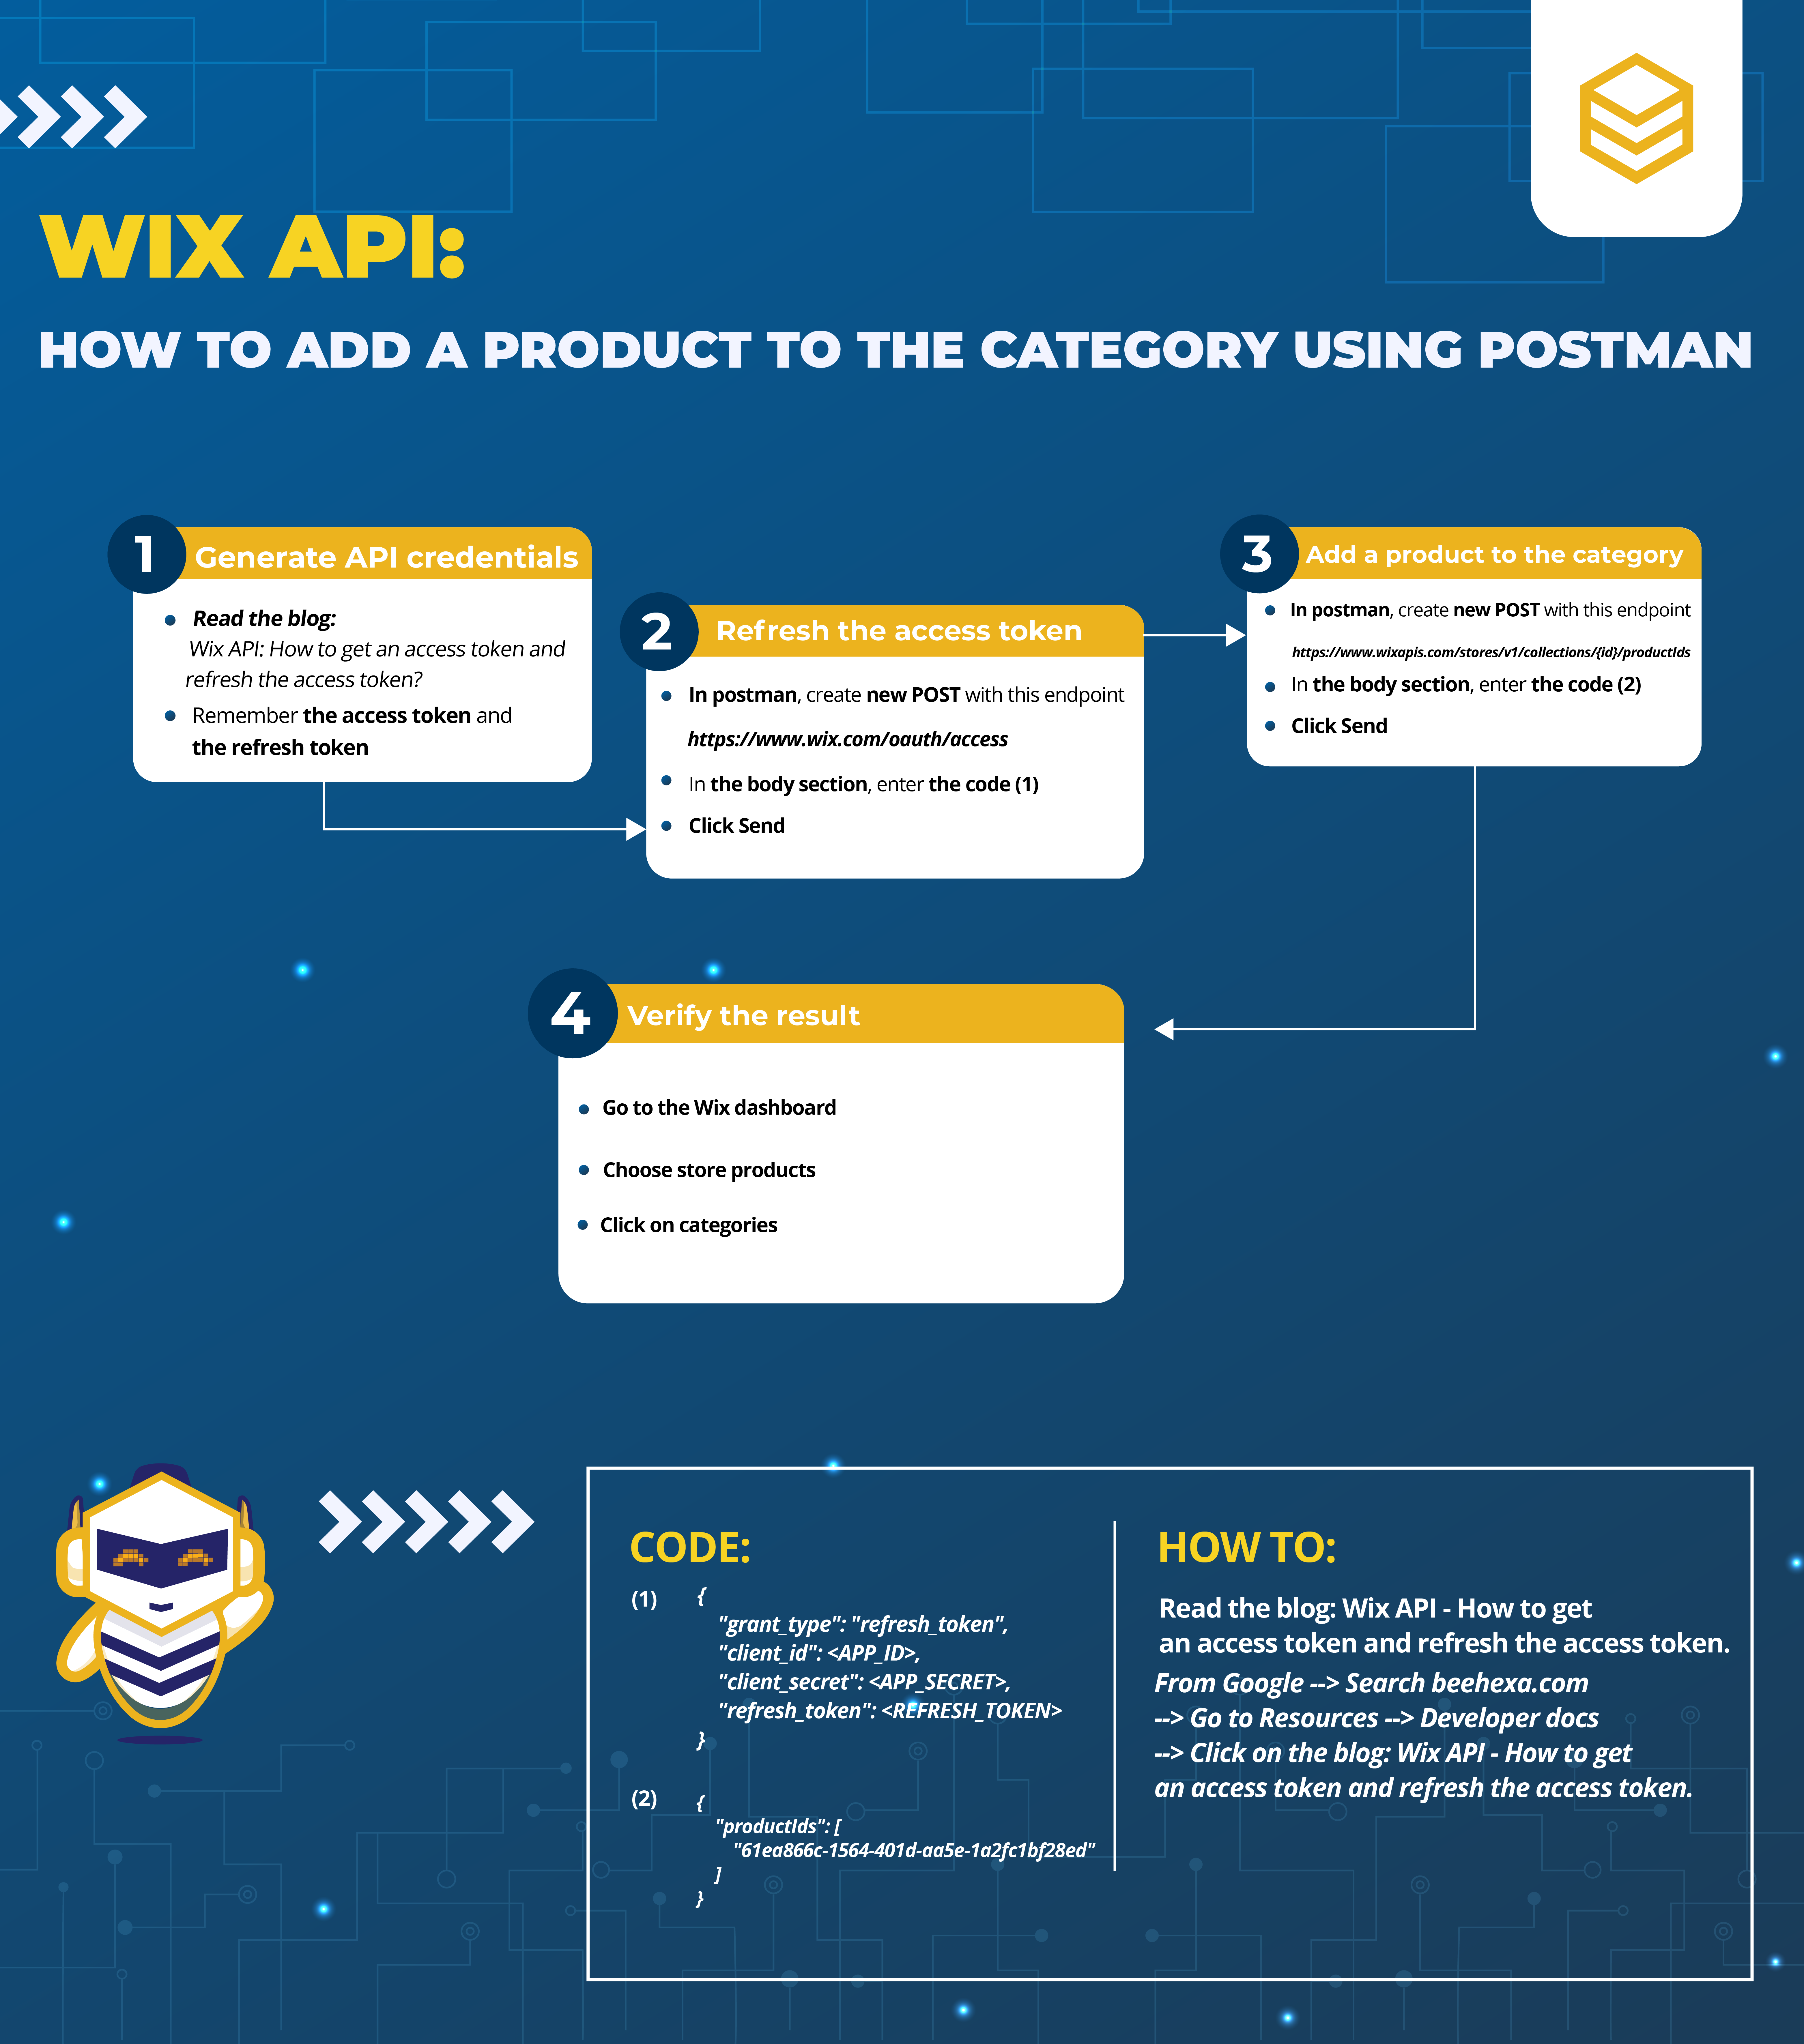 beehexa infor wix api how to add a product to the category using postman